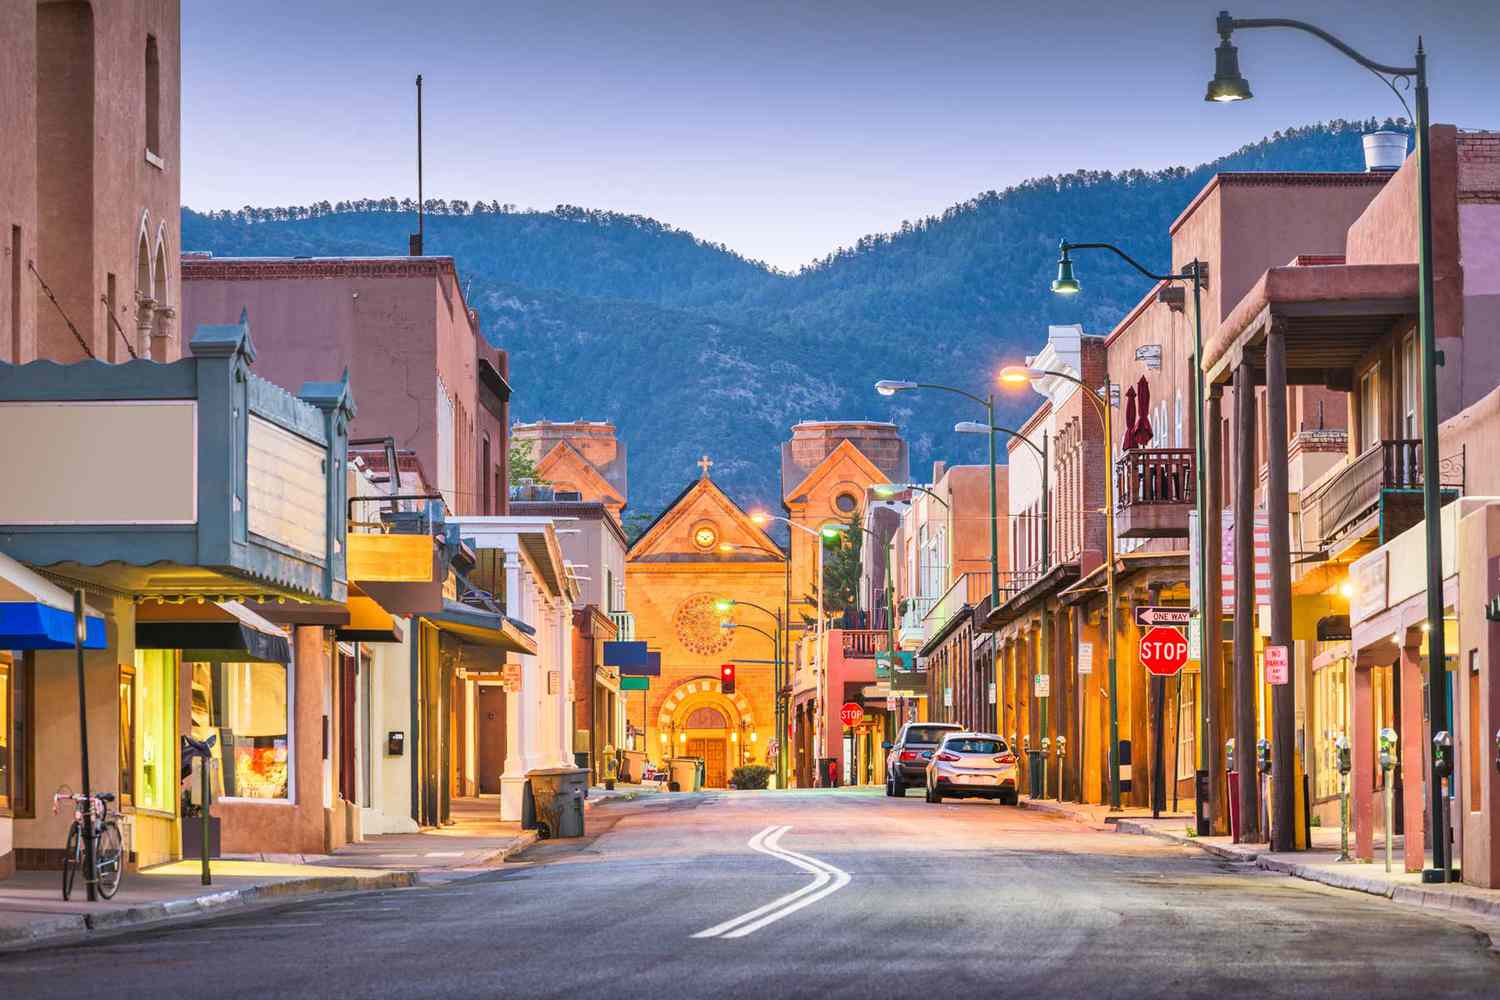 14-facts-about-prominent-industries-and-economic-development-in-santa-fe-new-mexico